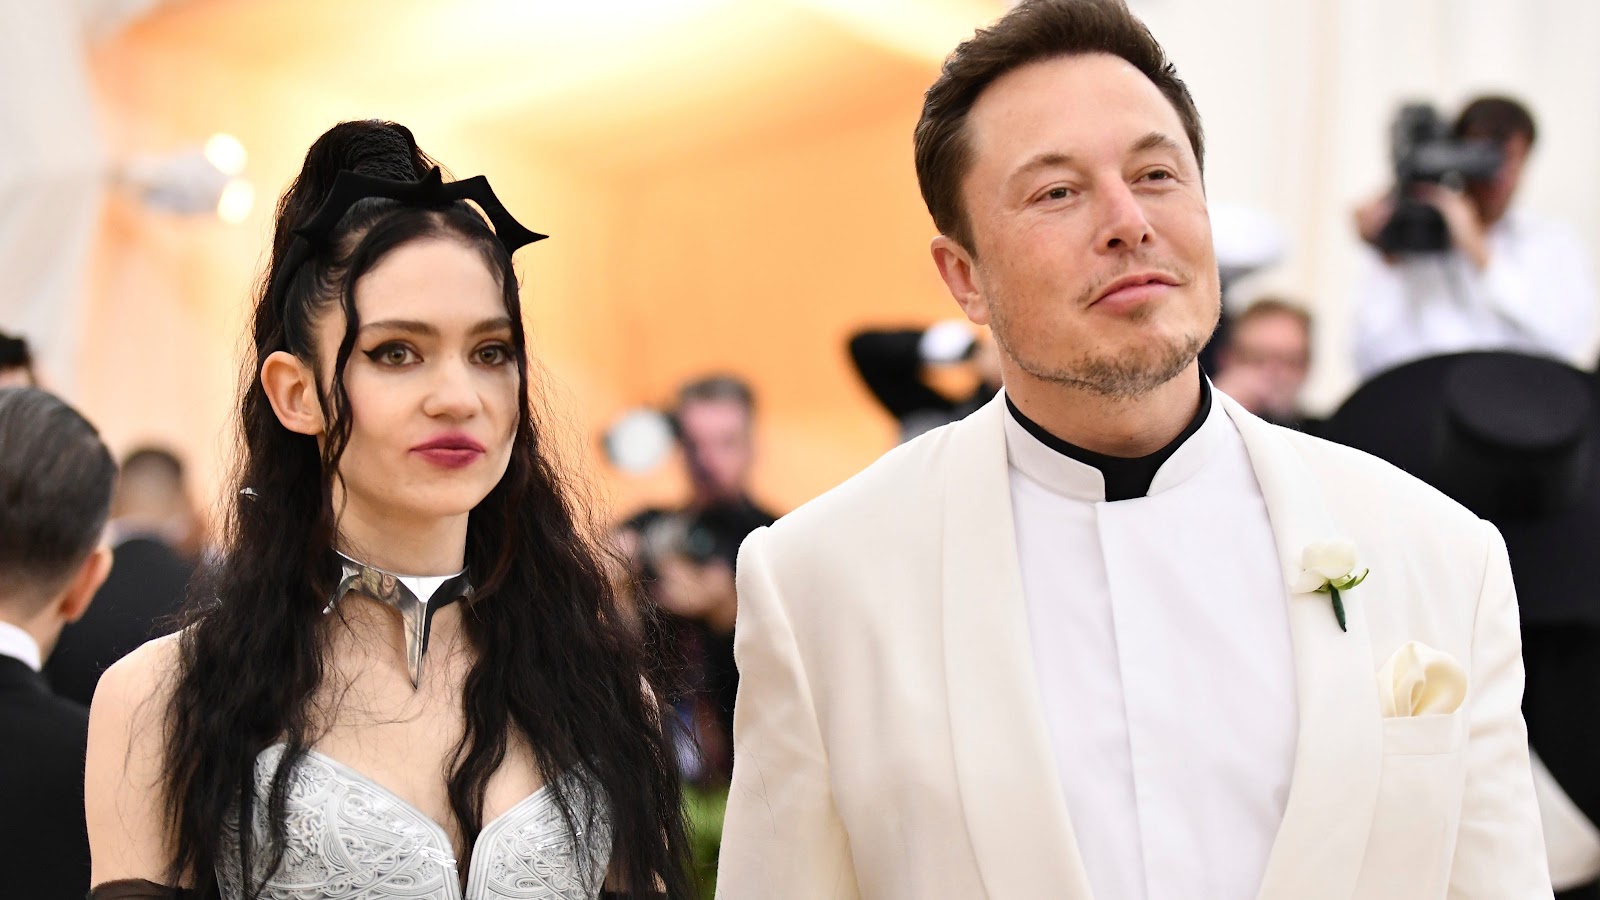 Elon Musk and Grimes: Find Out Where the Controversial Couple's Fame Comes From